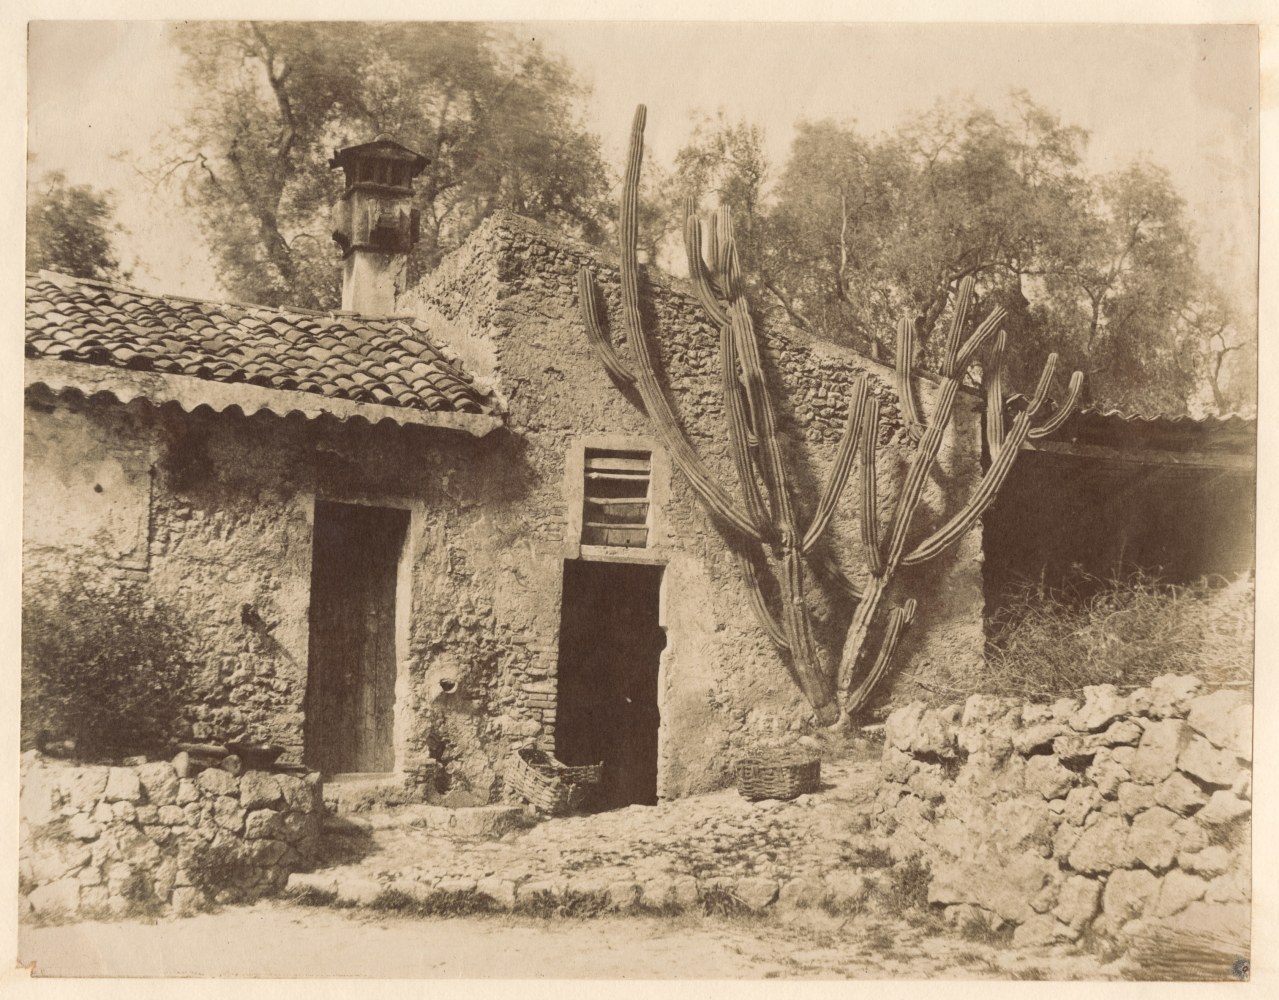 Alfred BACKHOUSE (English, 1823-1888) &quot;Near Nice&quot;, before 1856 Coated salt or light albumen print from a paper negative 21.4 x 27.5 cm mounted on 27.0 x 33.7 cm paper Titled in pencil on mount